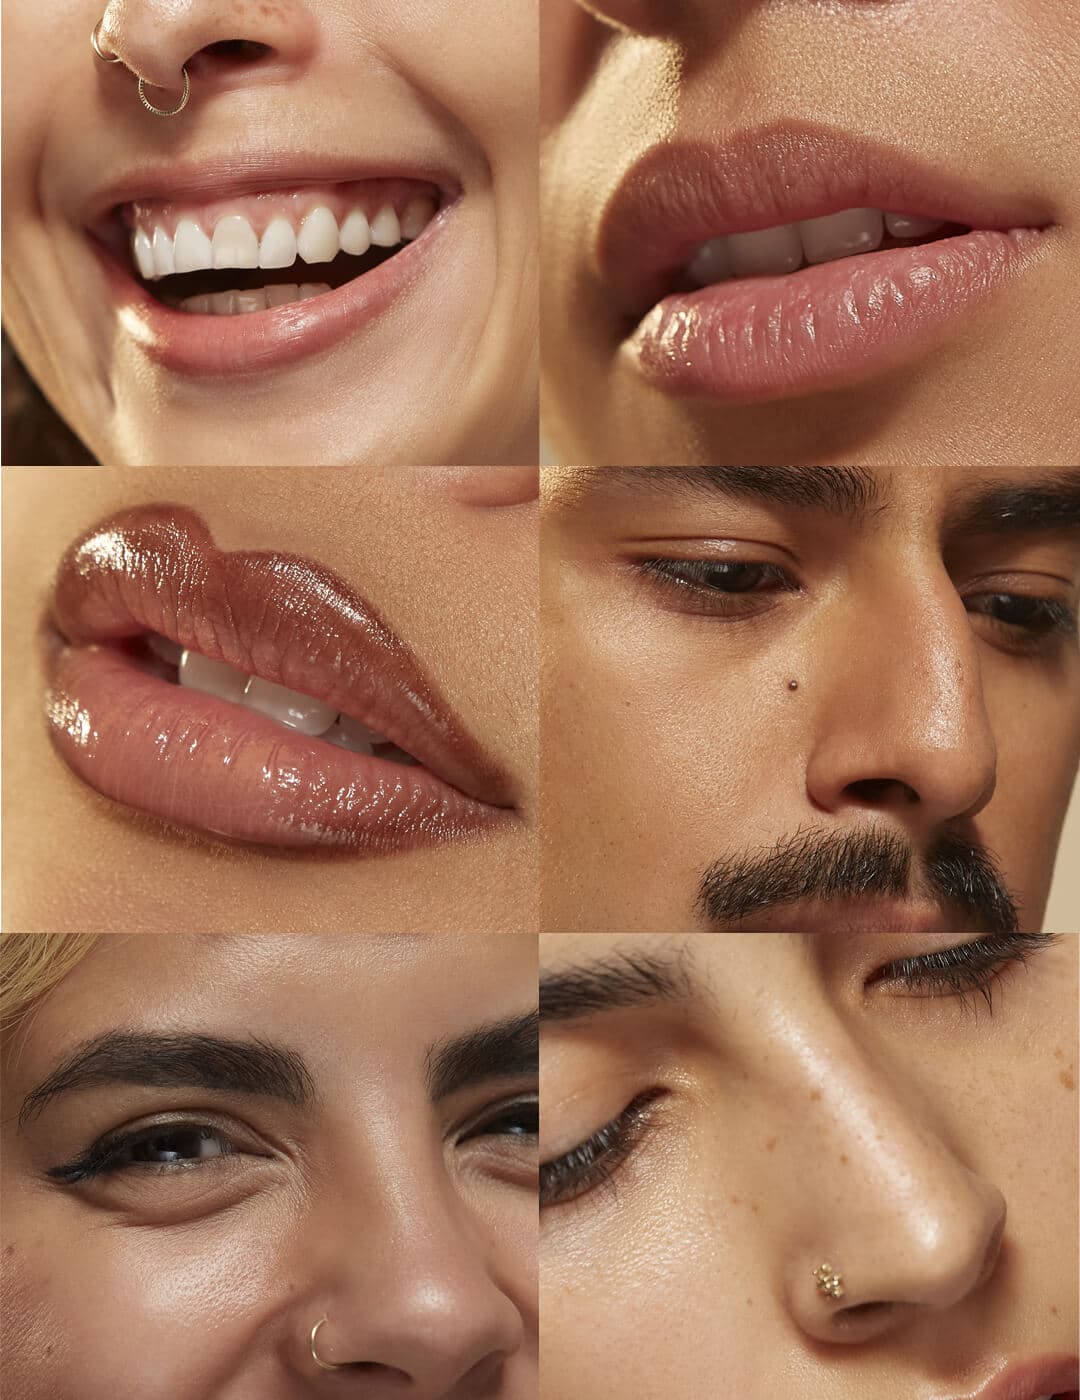 Collage image of close-ups of beautiful people's noses and lips